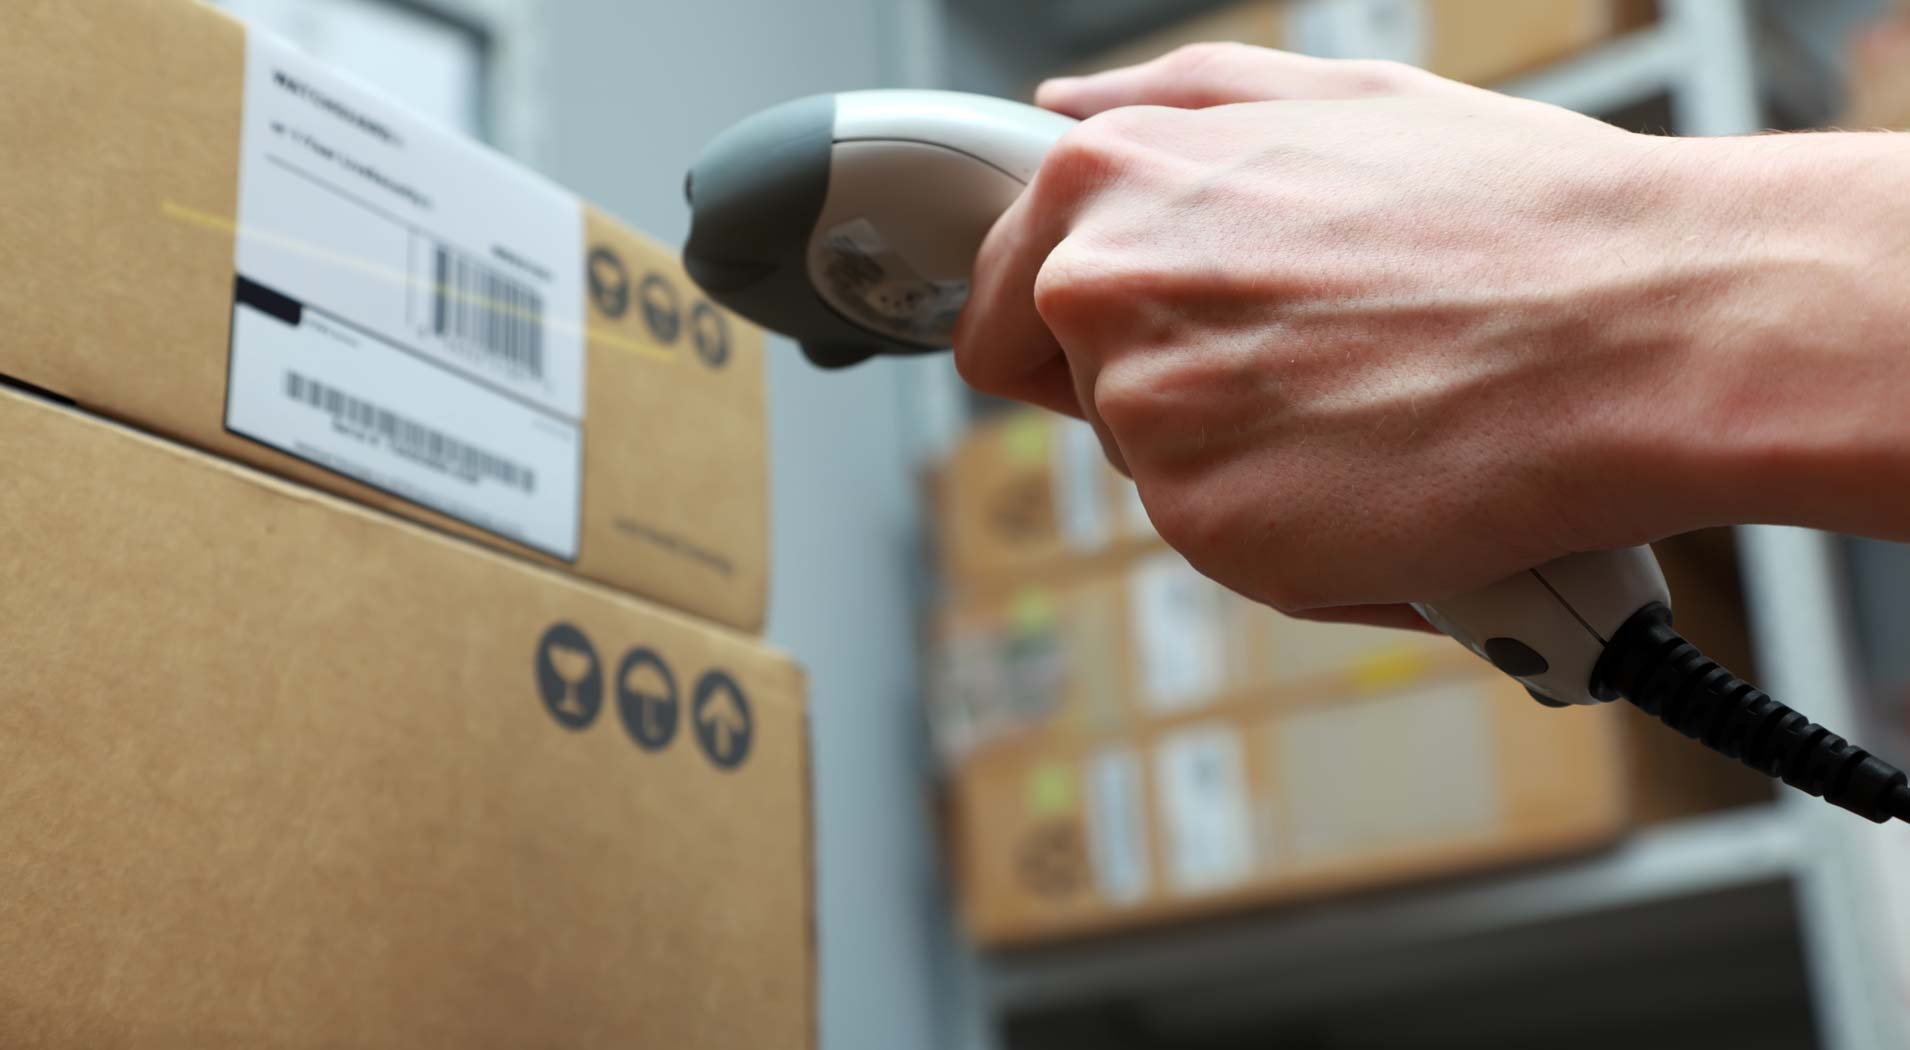 Person scanning a package